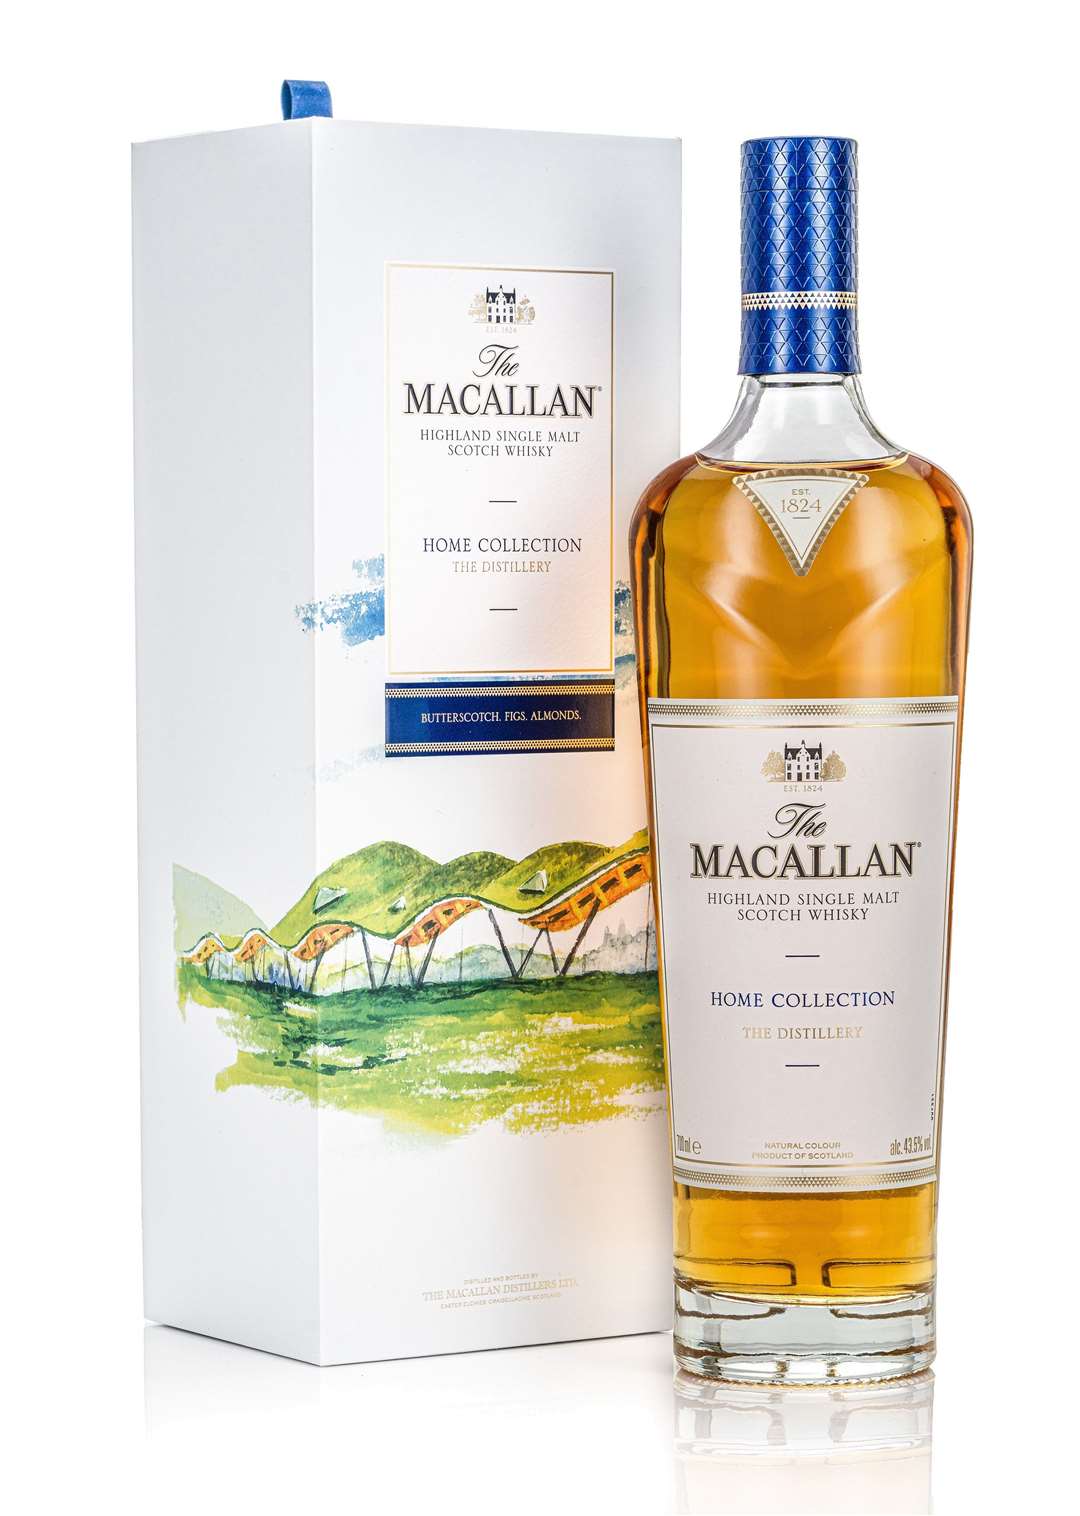 The new whisky launched by The Macallan.